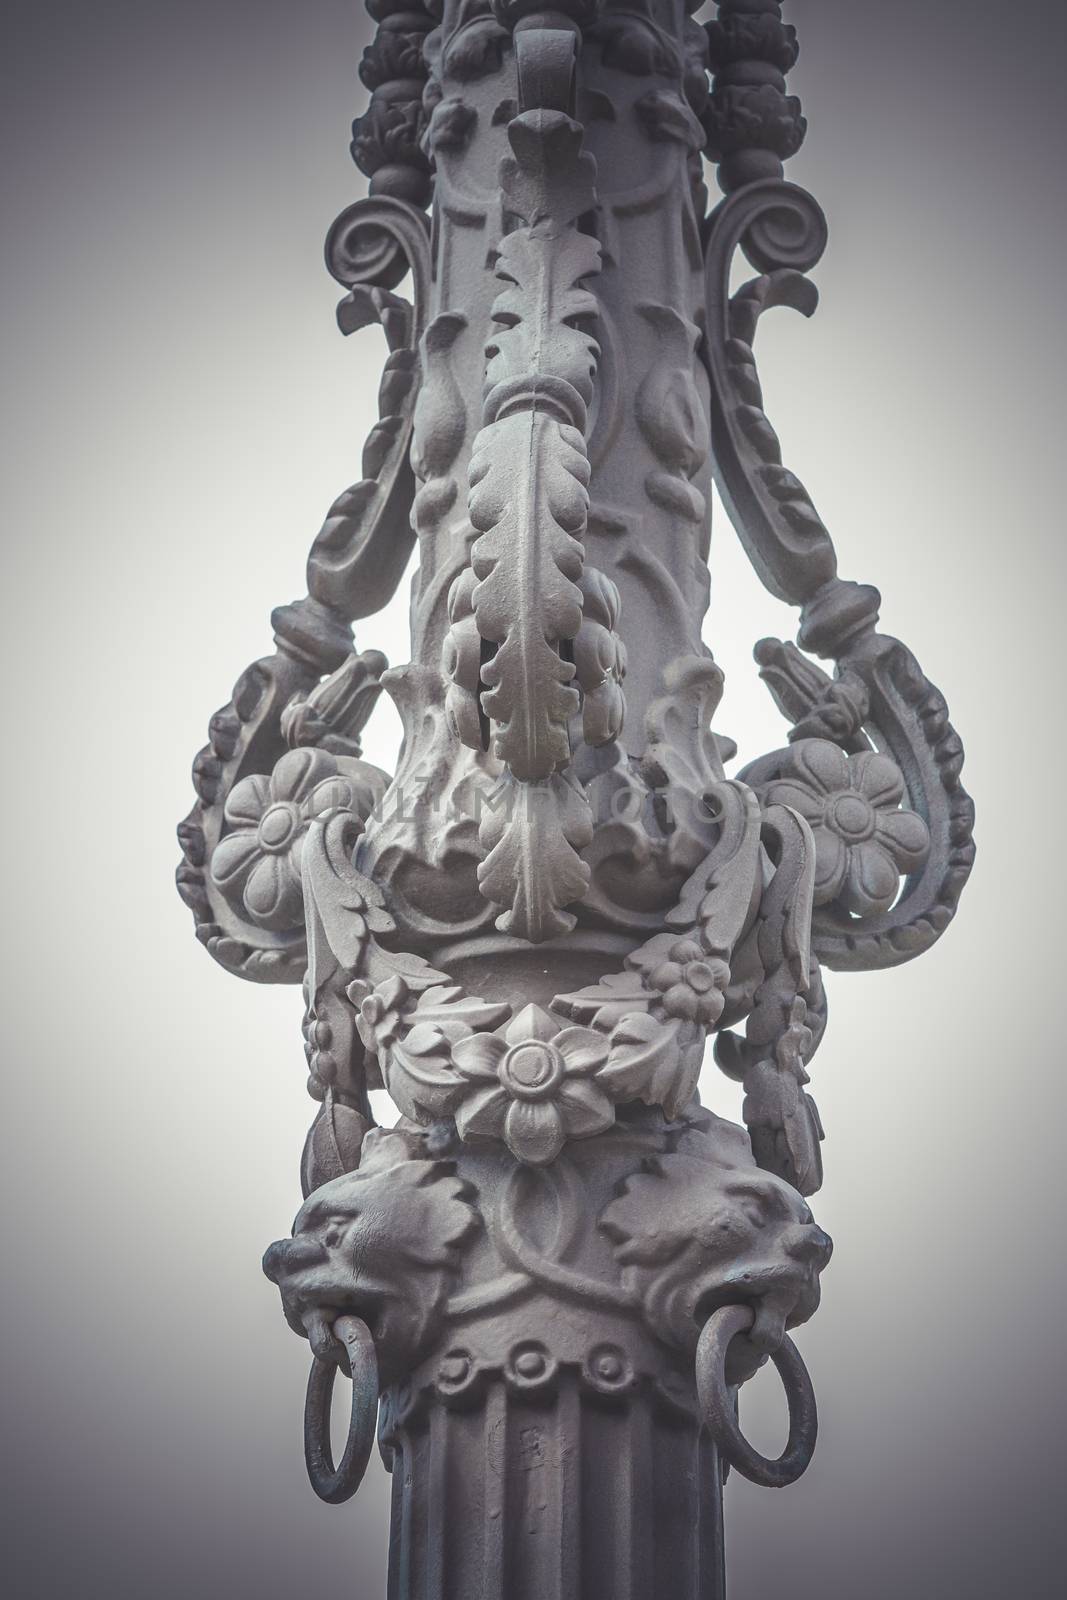 traditional street lamp with decorative metal flourishes